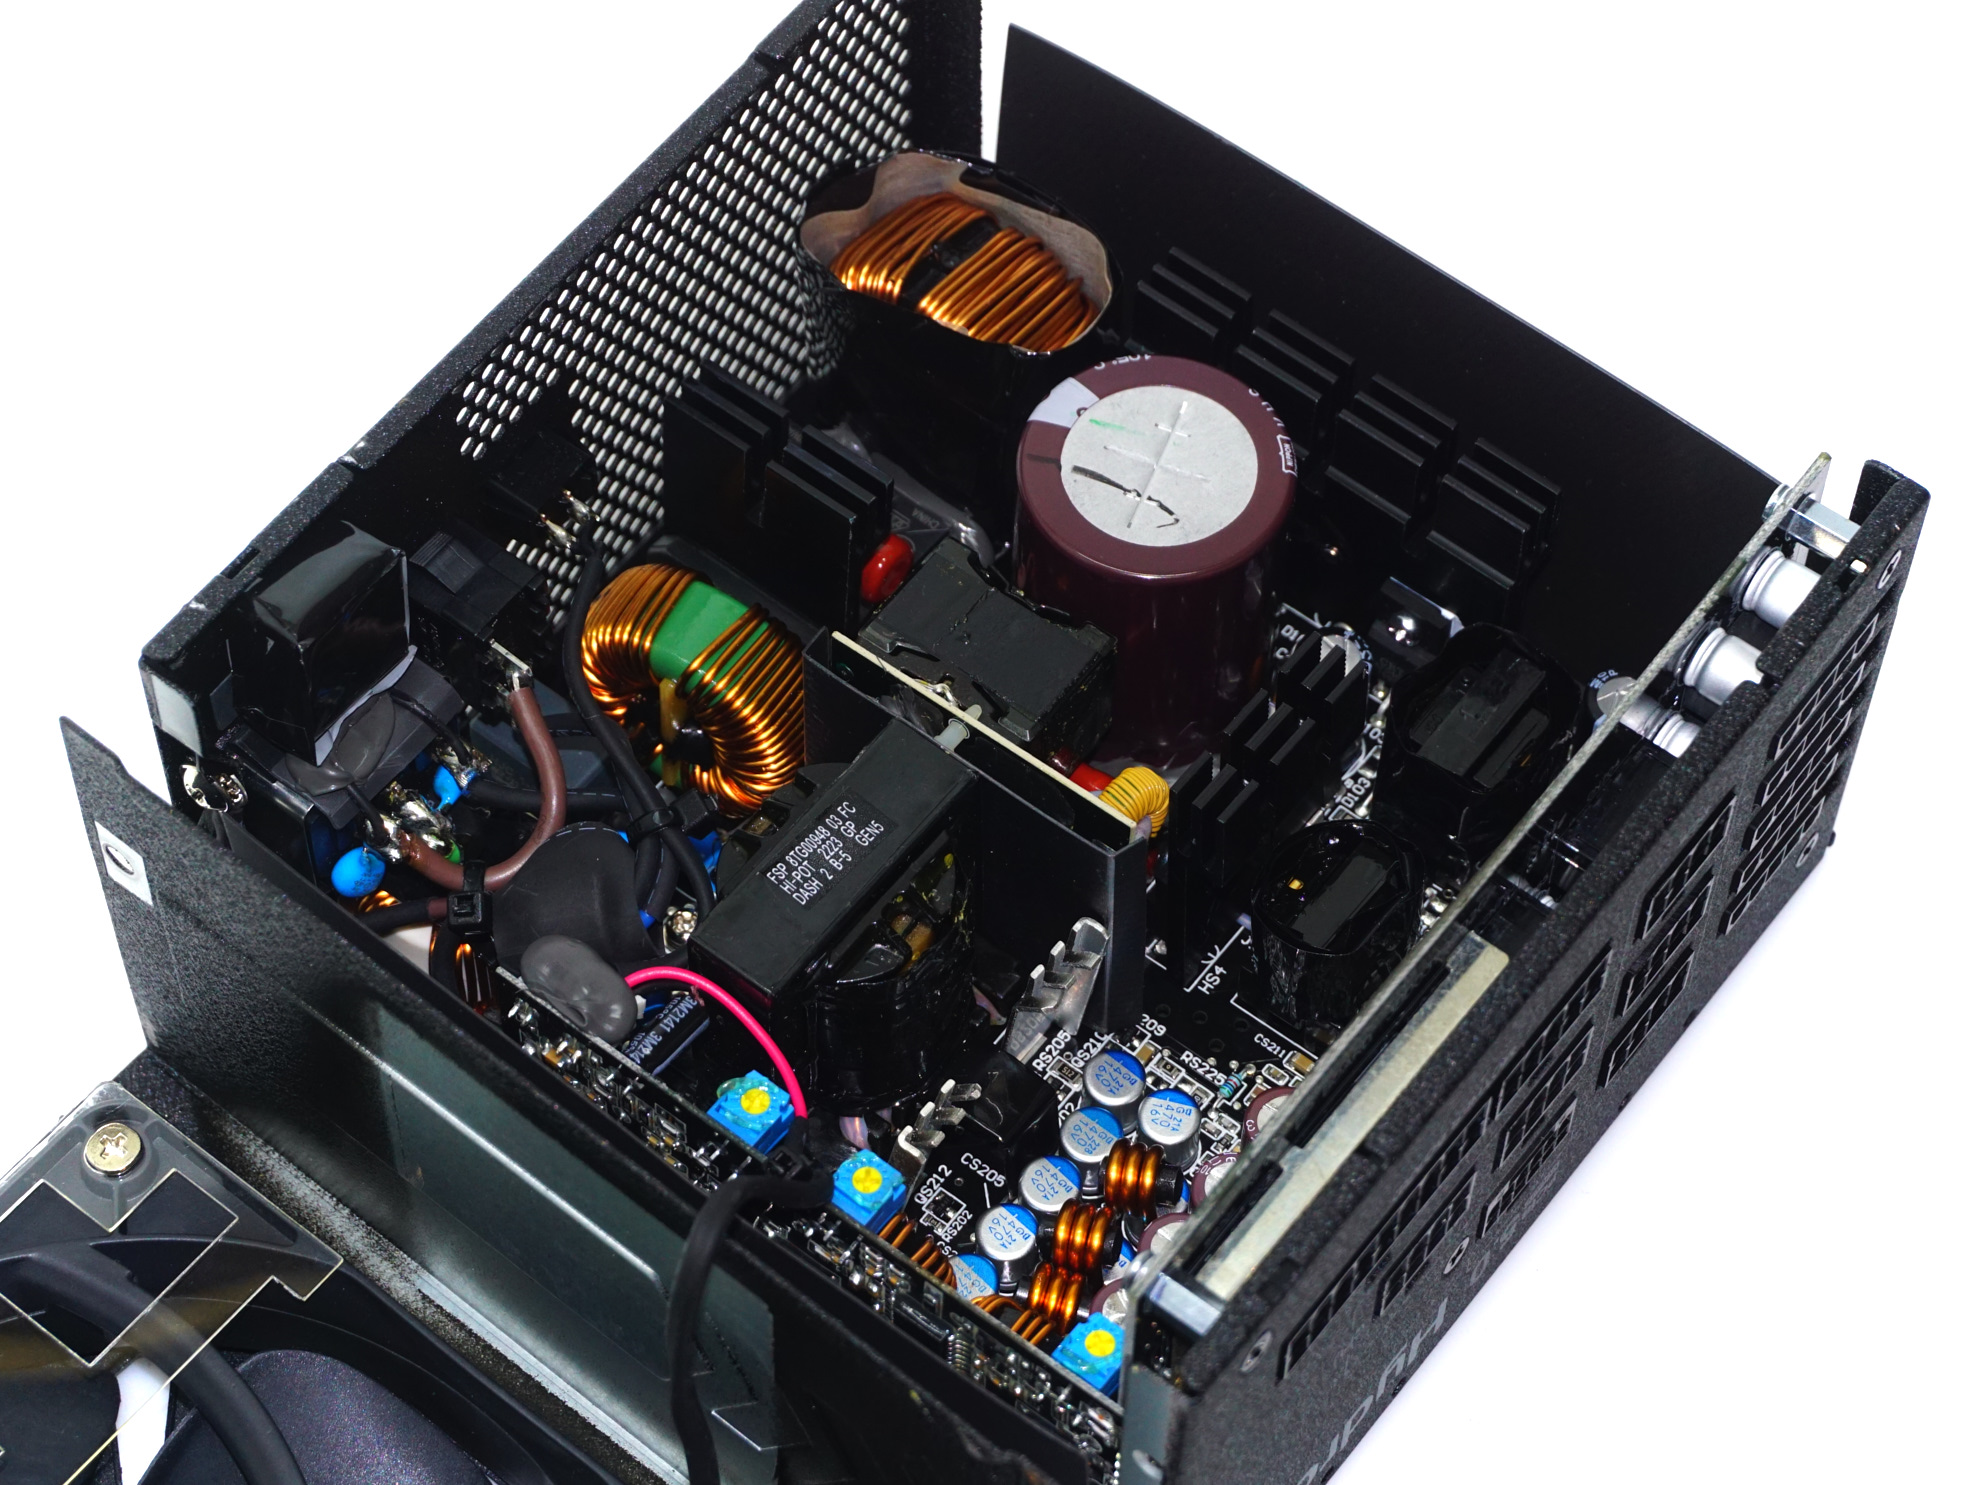 The FSP Hydro G Pro 1000W ATX 3.0 PSU Review: Solid and Affordable